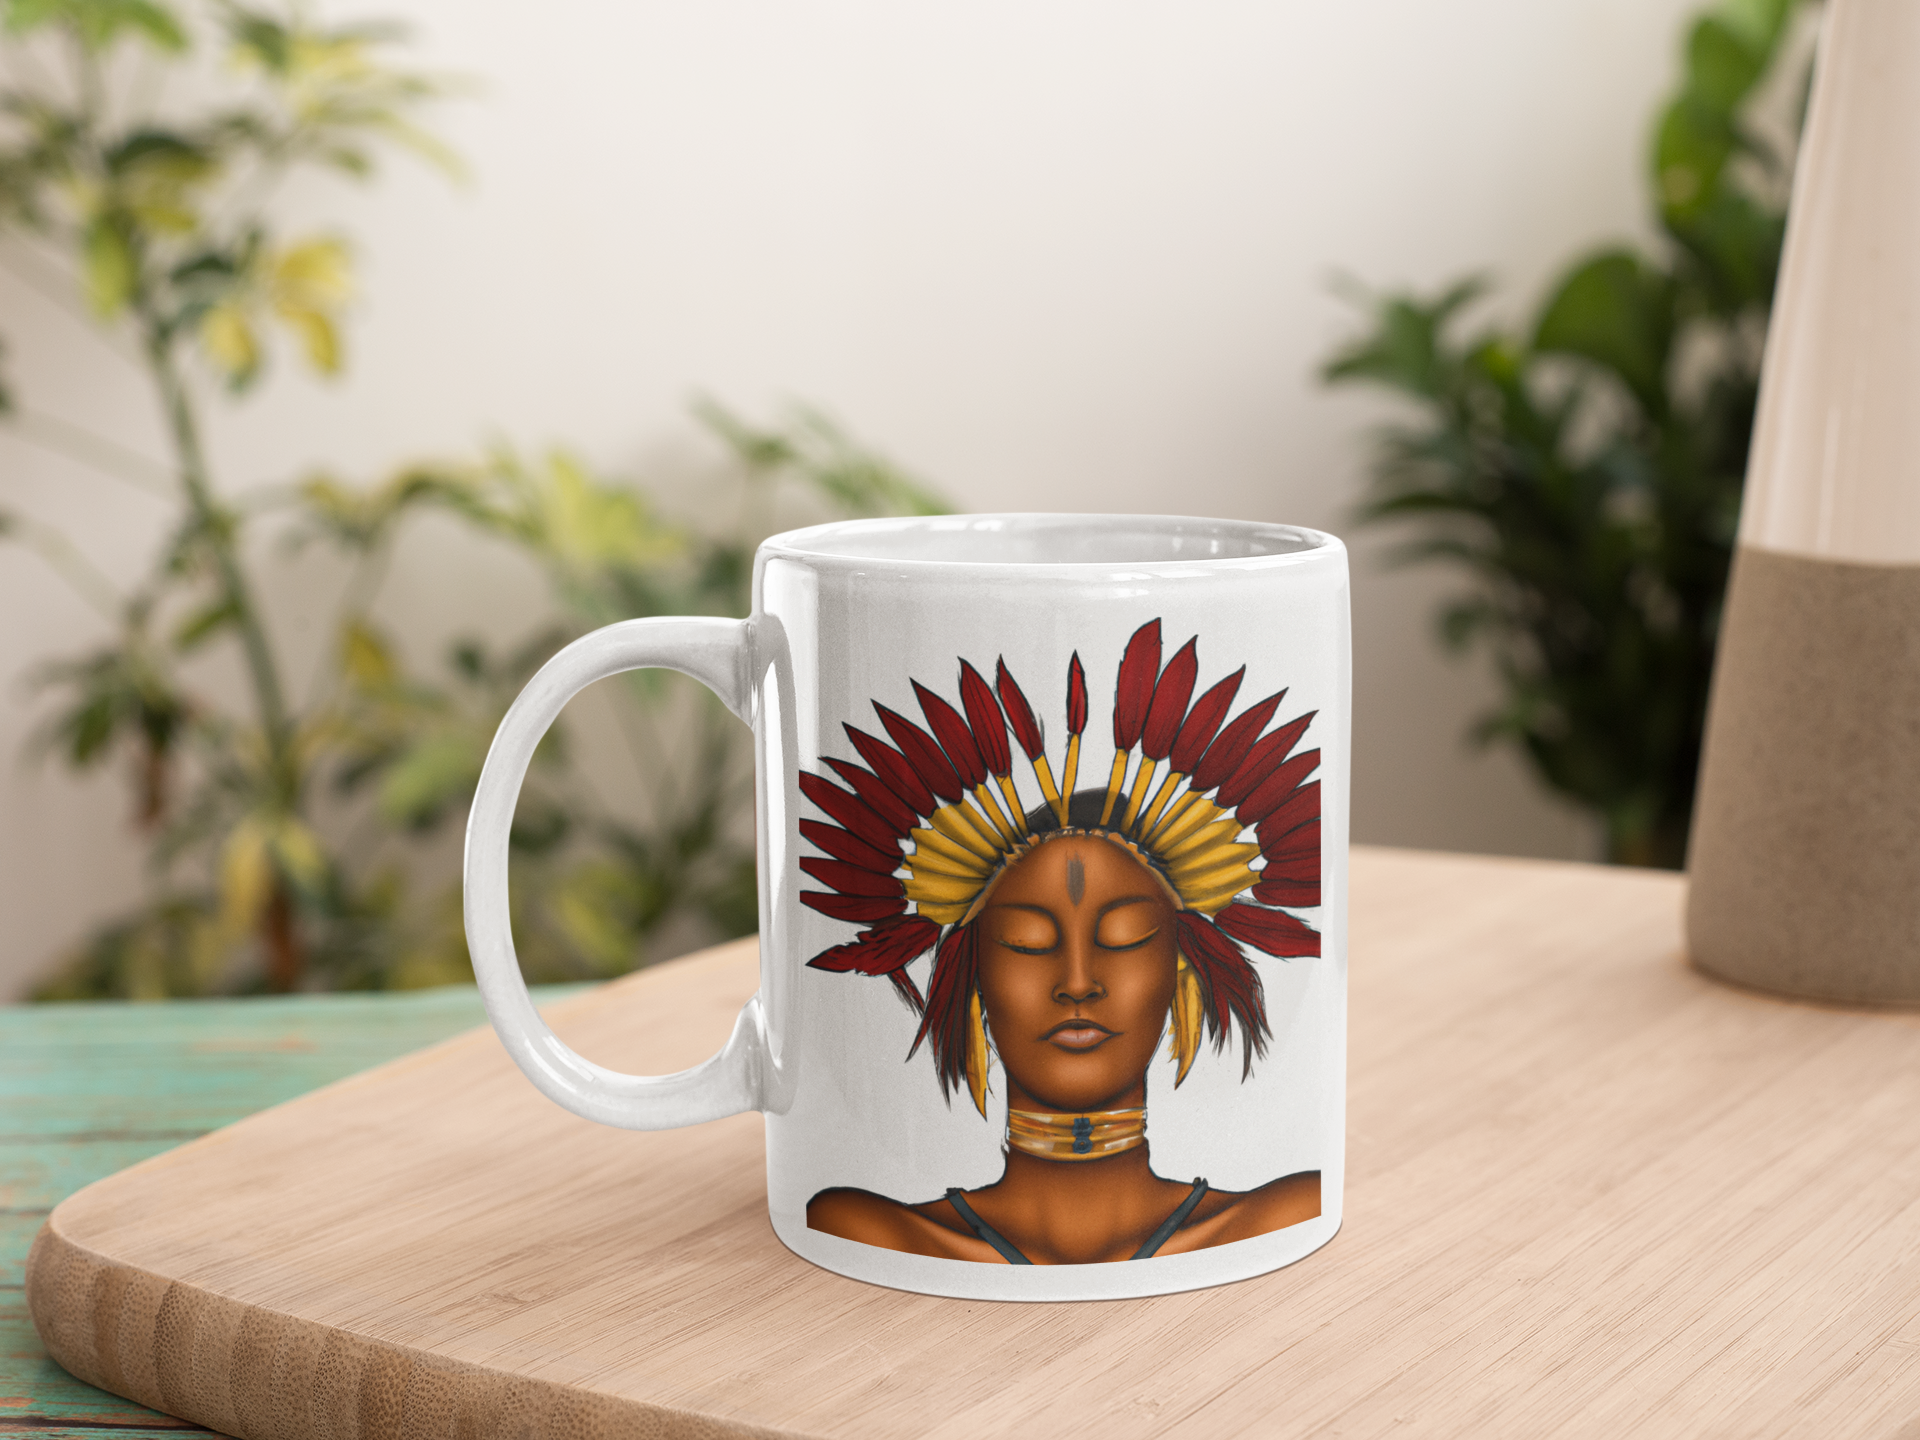 Shop Cups, Mugs, and Drinkware